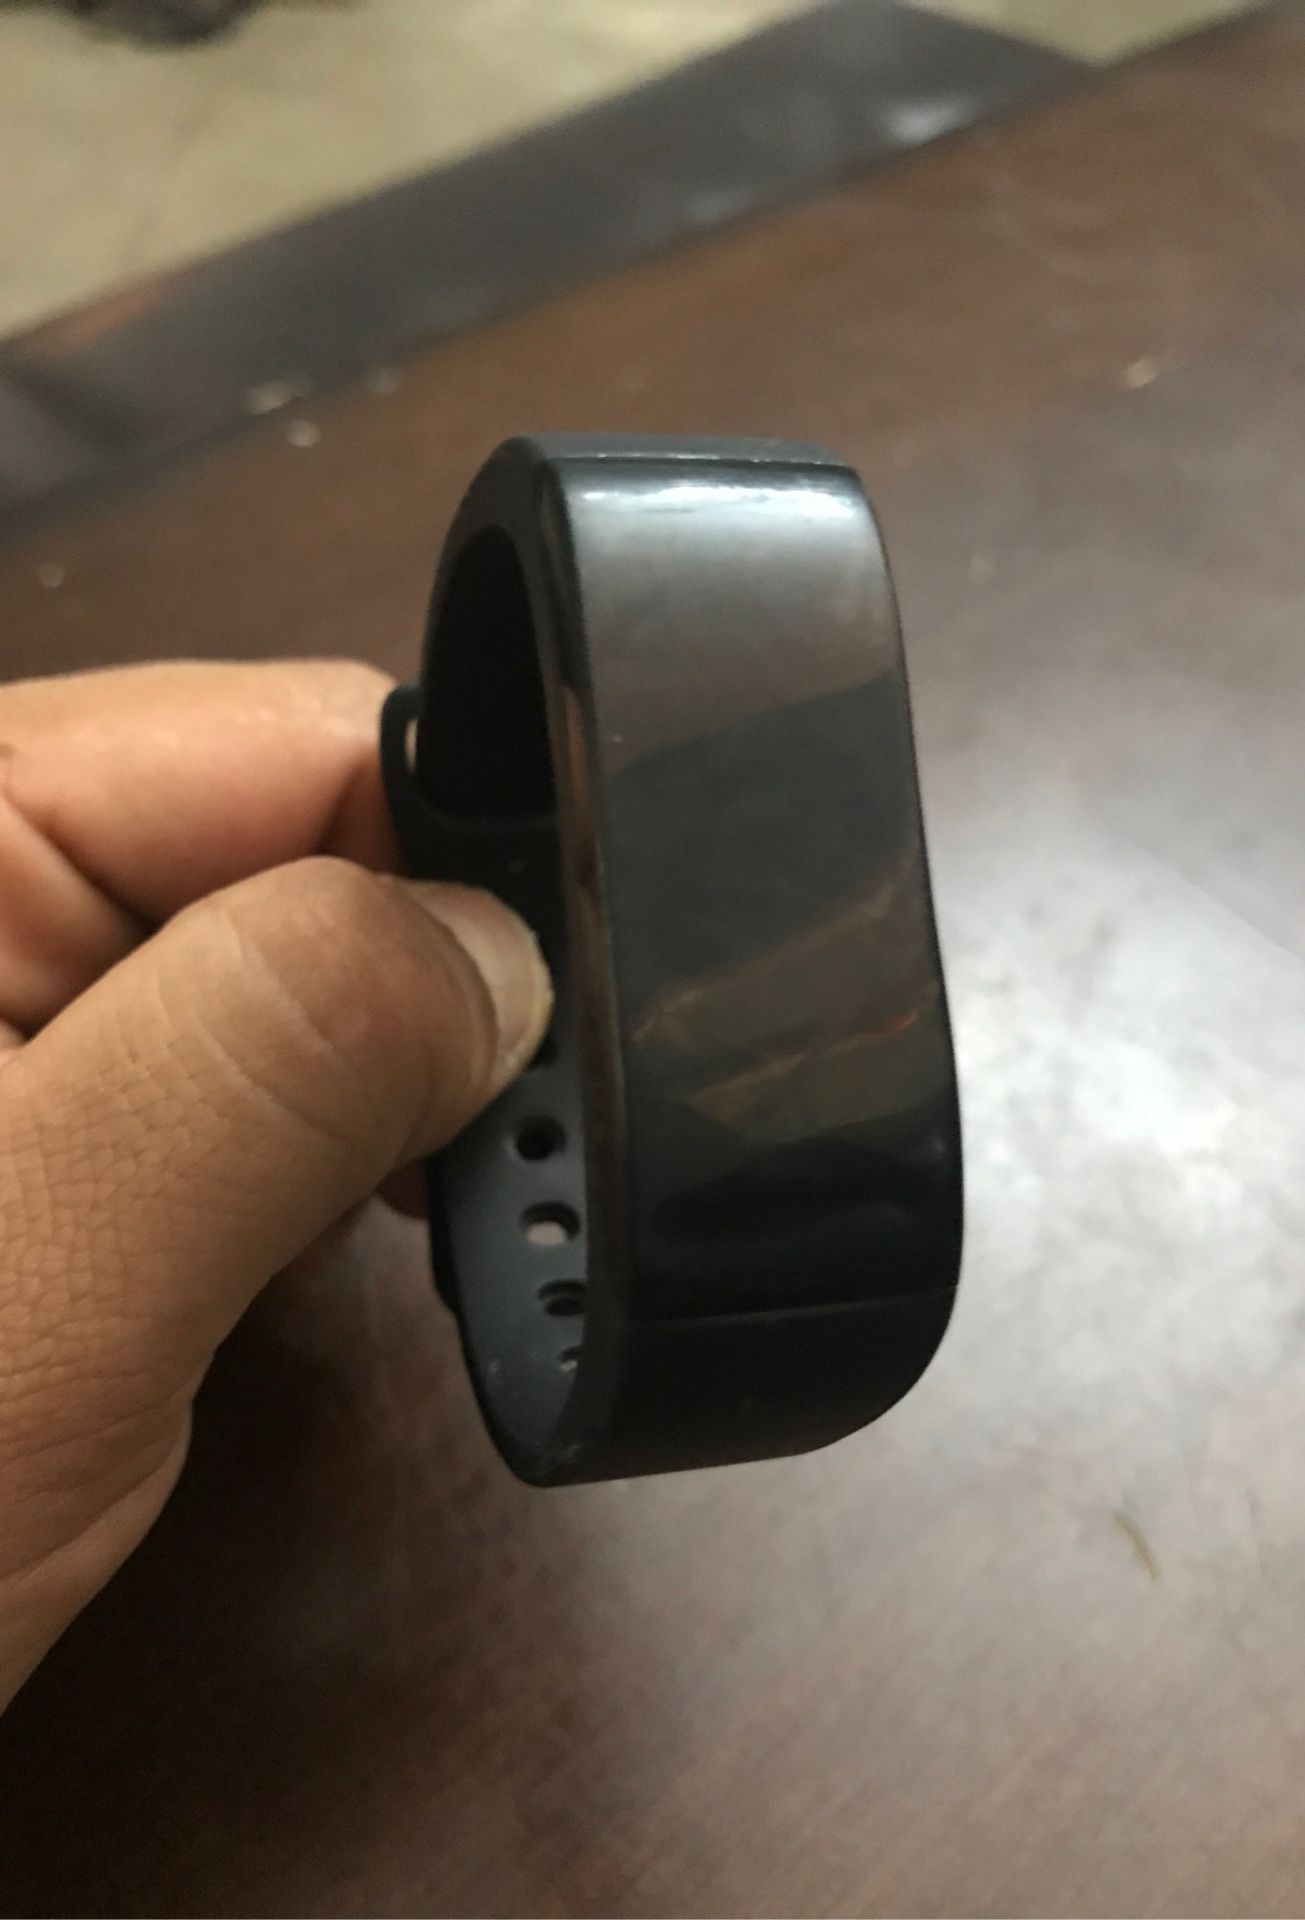 Fitbit w/o Charger